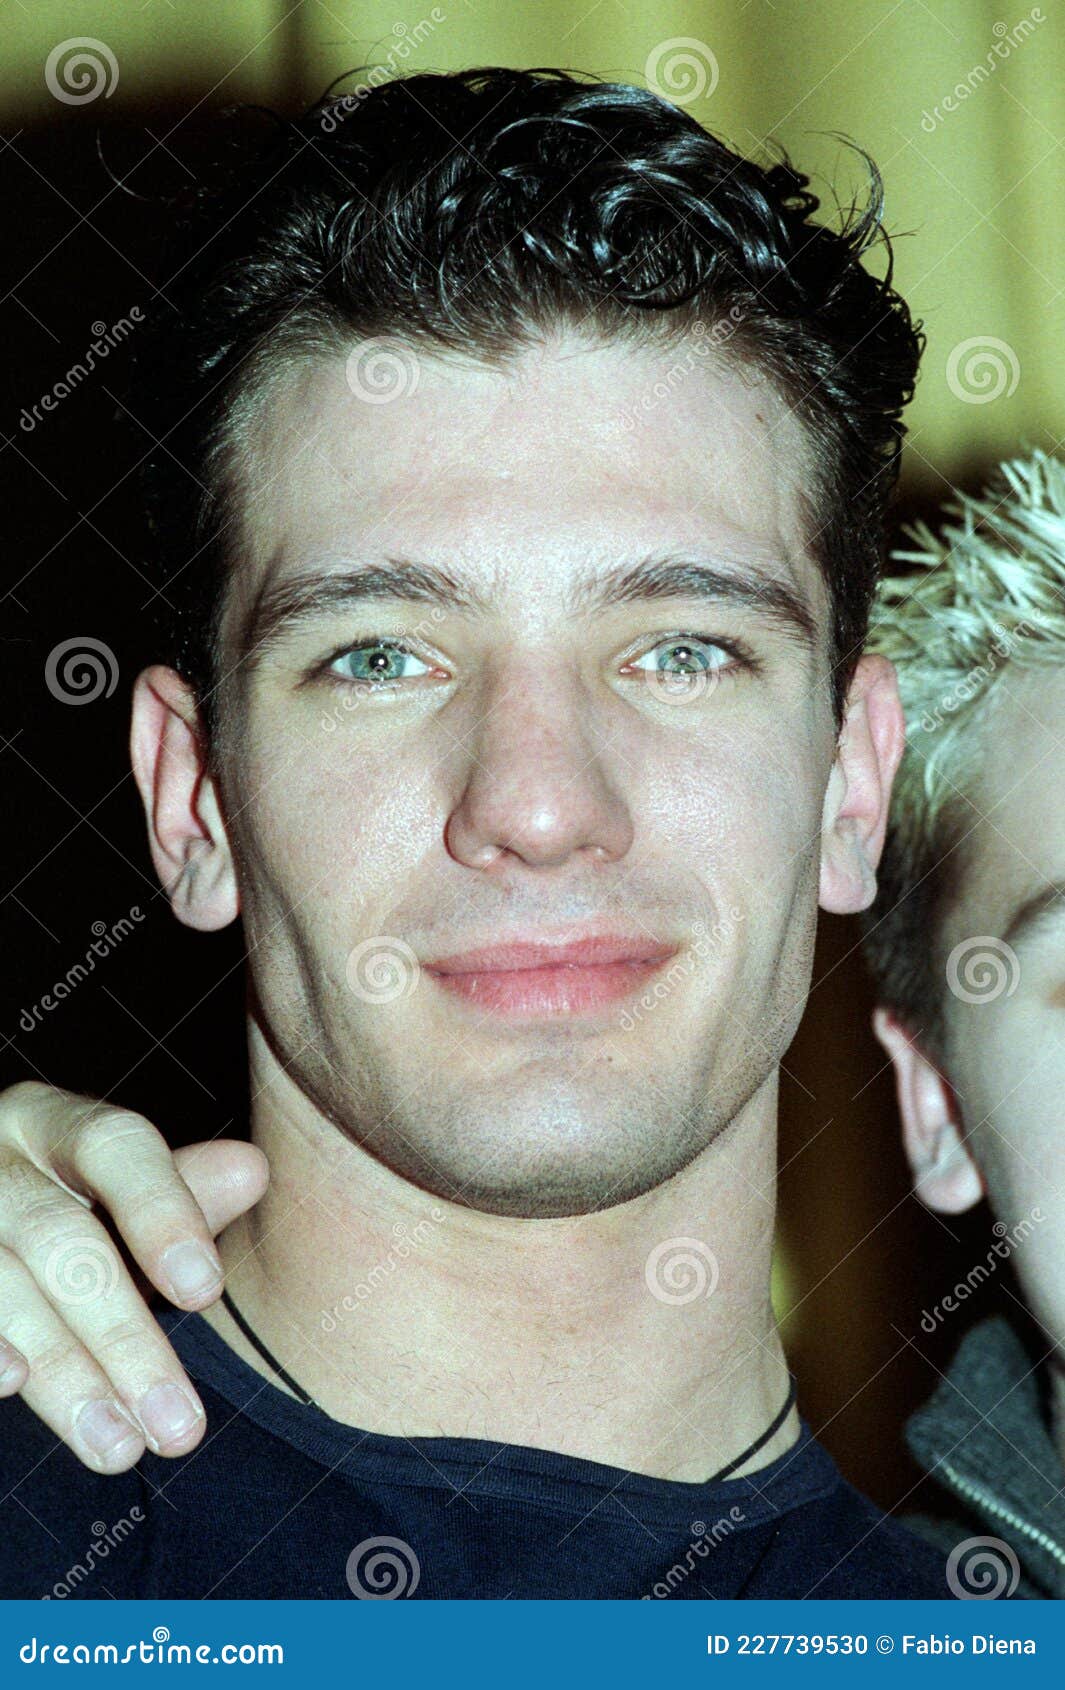 NSYNC , JC Chasez during the Photo Session Editorial Image - Image of ...